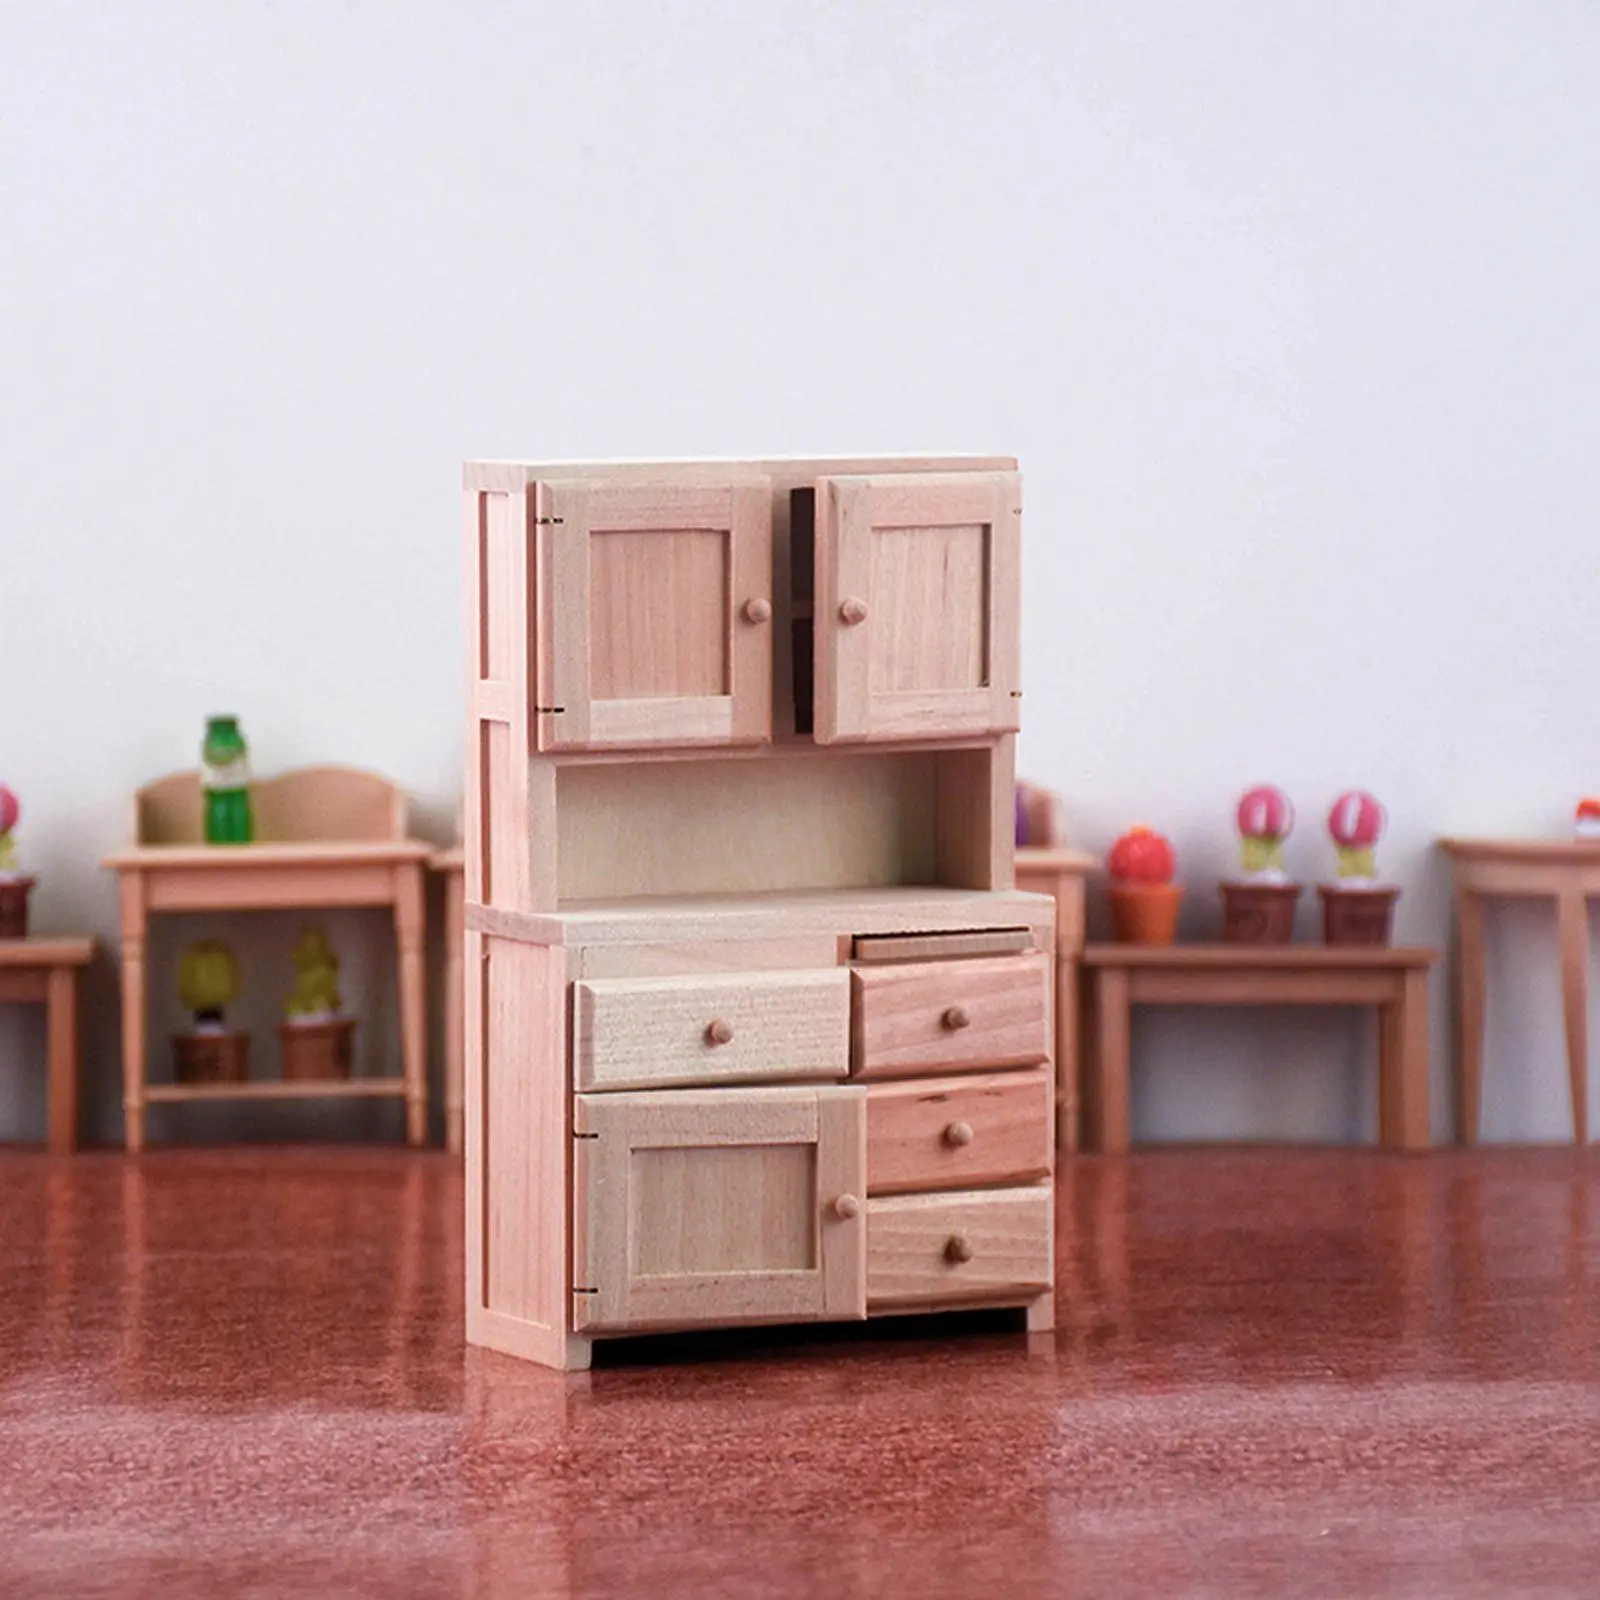 Simulation Unpainted Wooden Cabinet Dollhouse Scenery 1:12 Ornaments